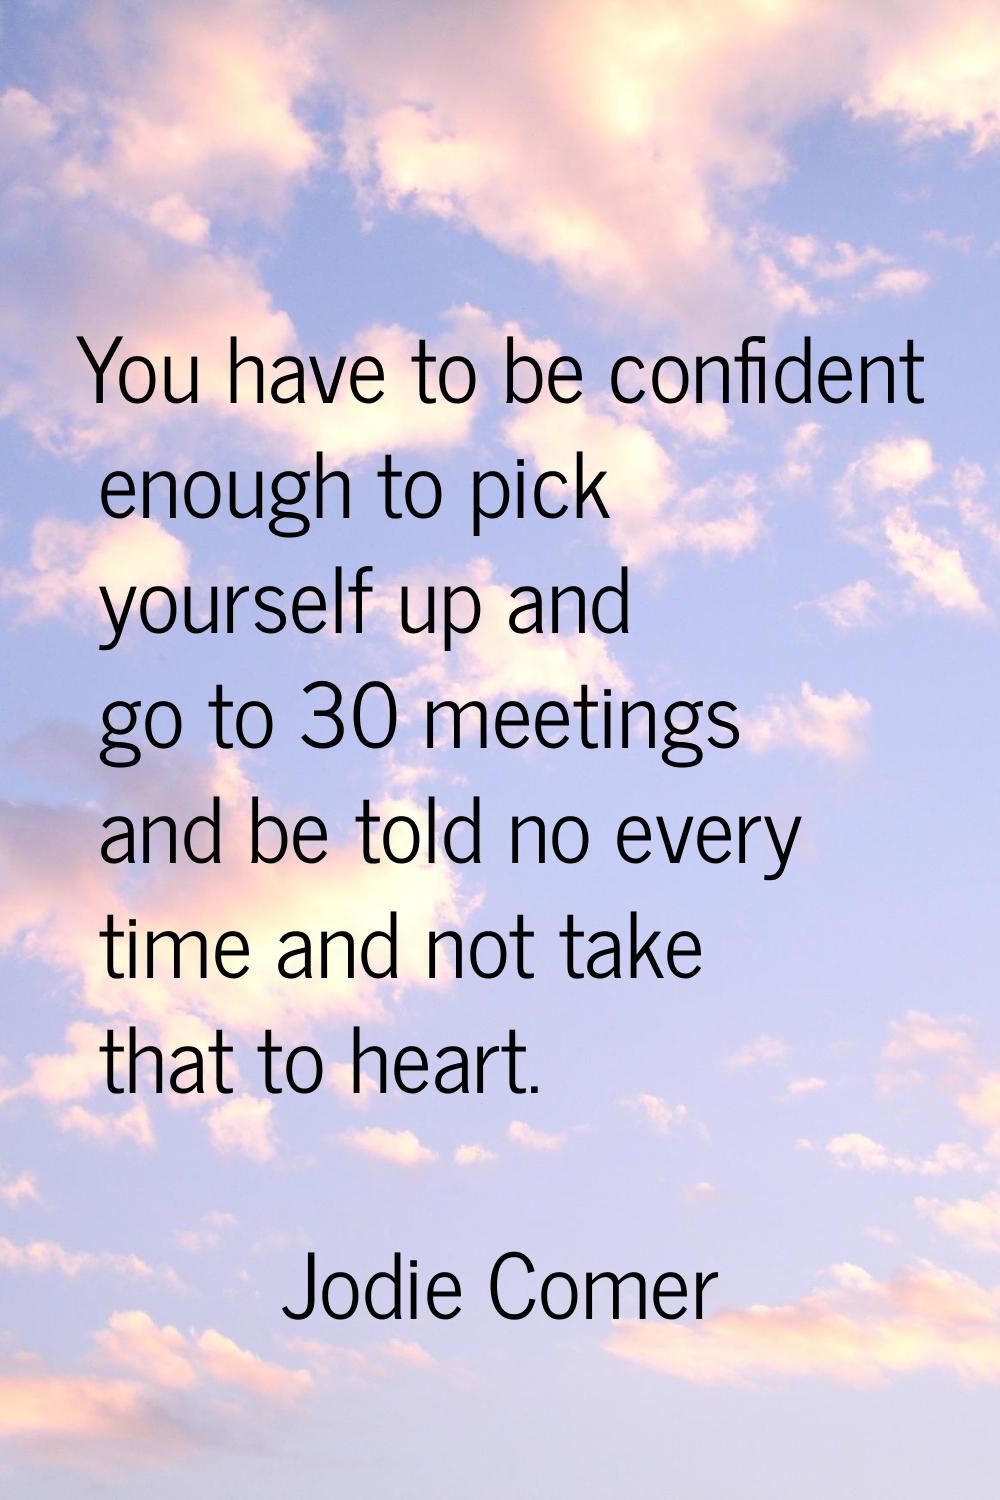 You have to be confident enough to pick yourself up and go to 30 meetings and be told no every time